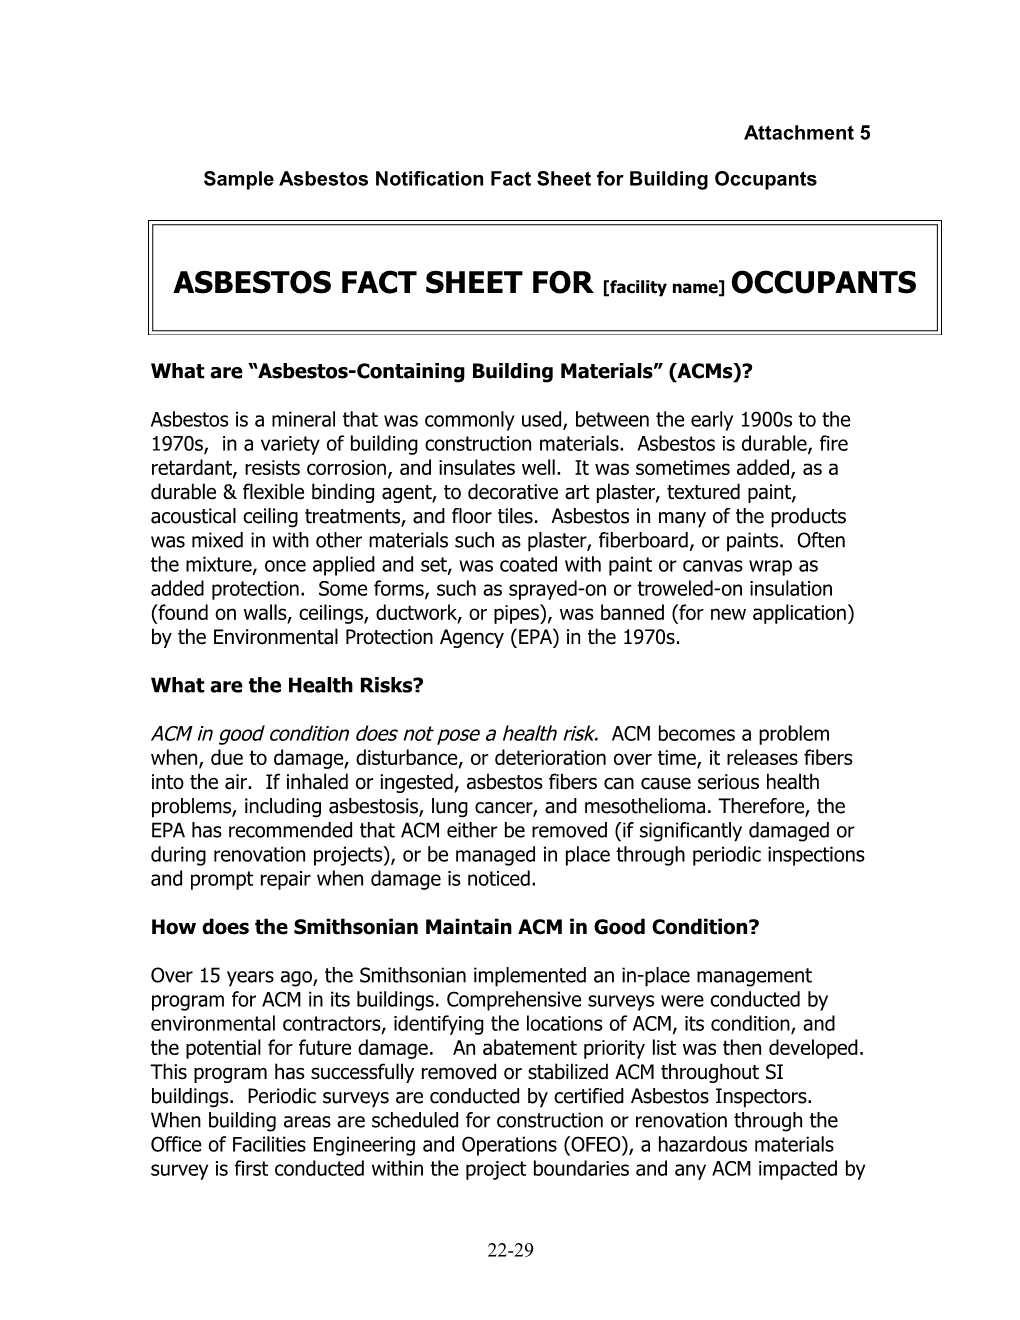 Sample Asbestos Notification Fact Sheet for Building Occupants